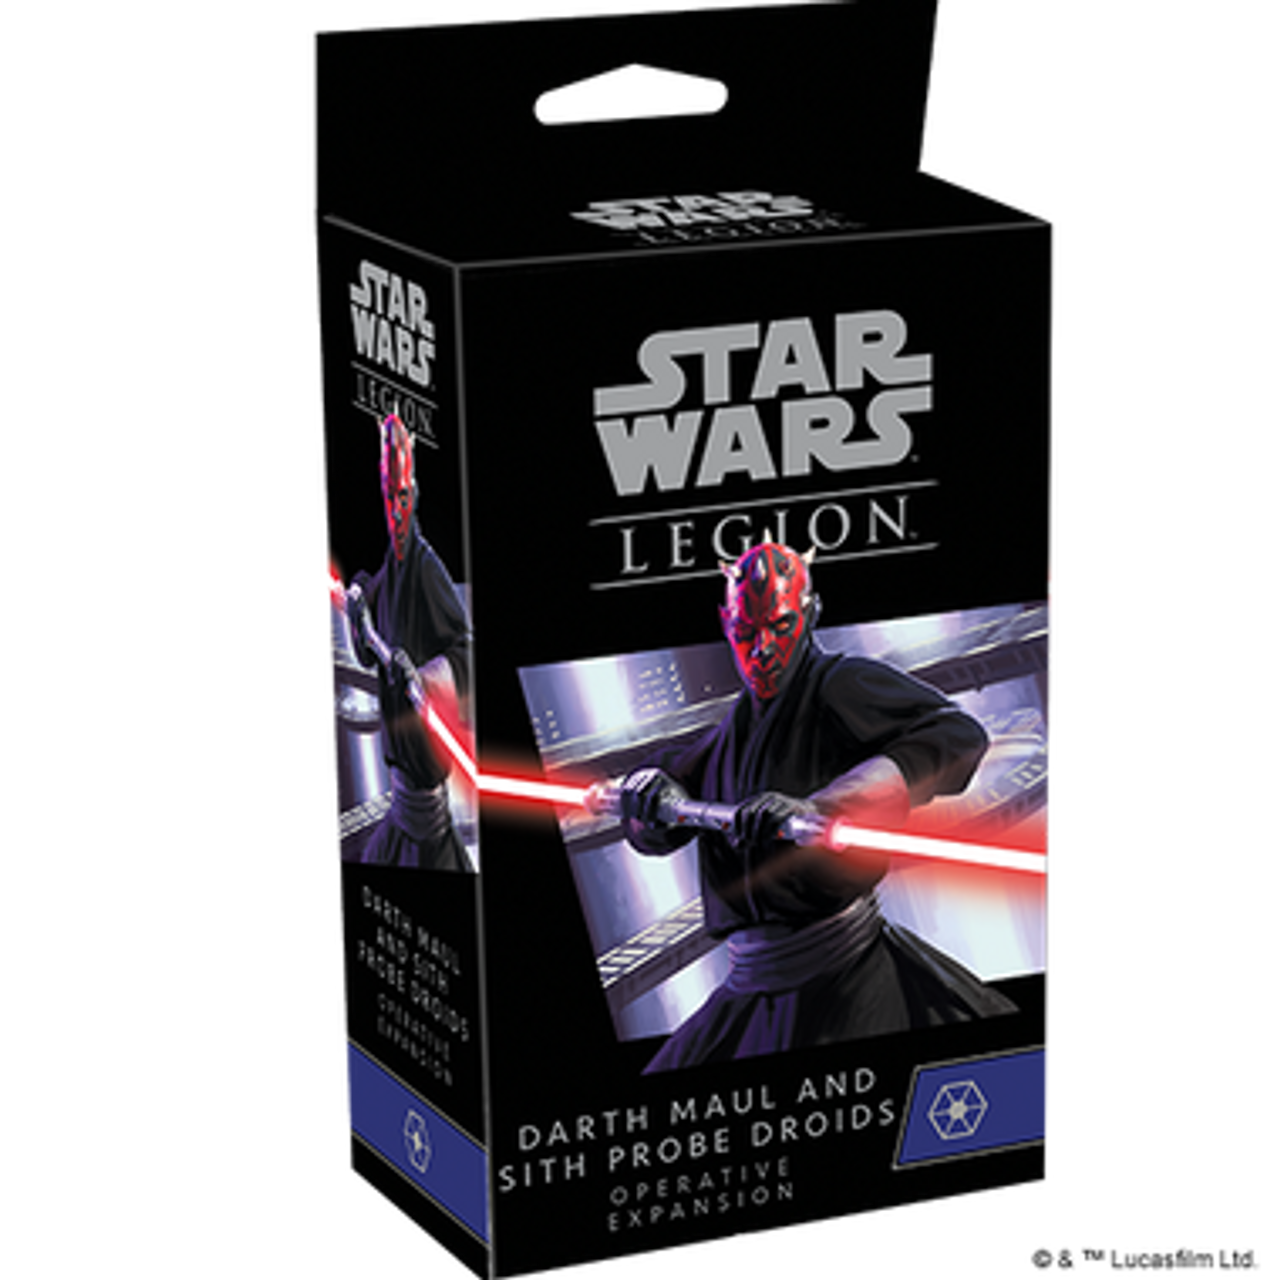 Star Wars: Legion - Darth Maul and Sith Probe Droids Operative Expansion